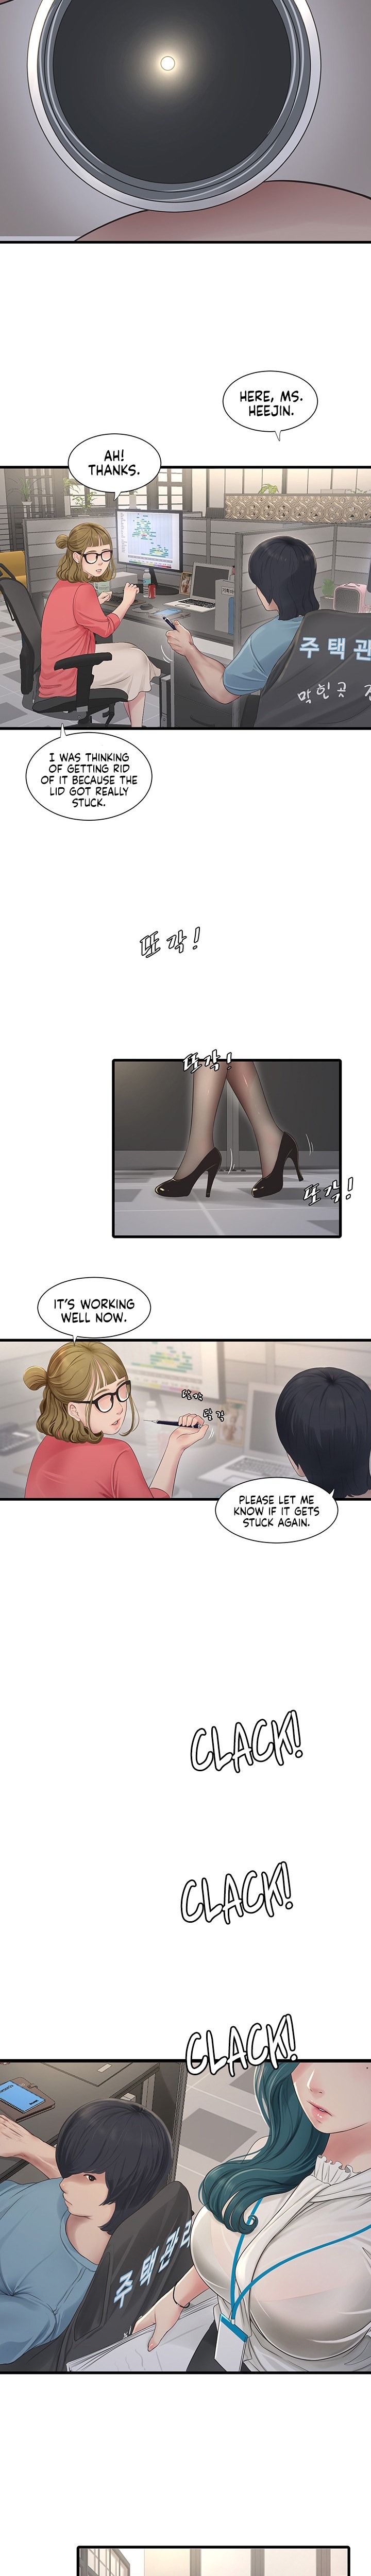 The Hole Diary - Chapter 1 Page 3